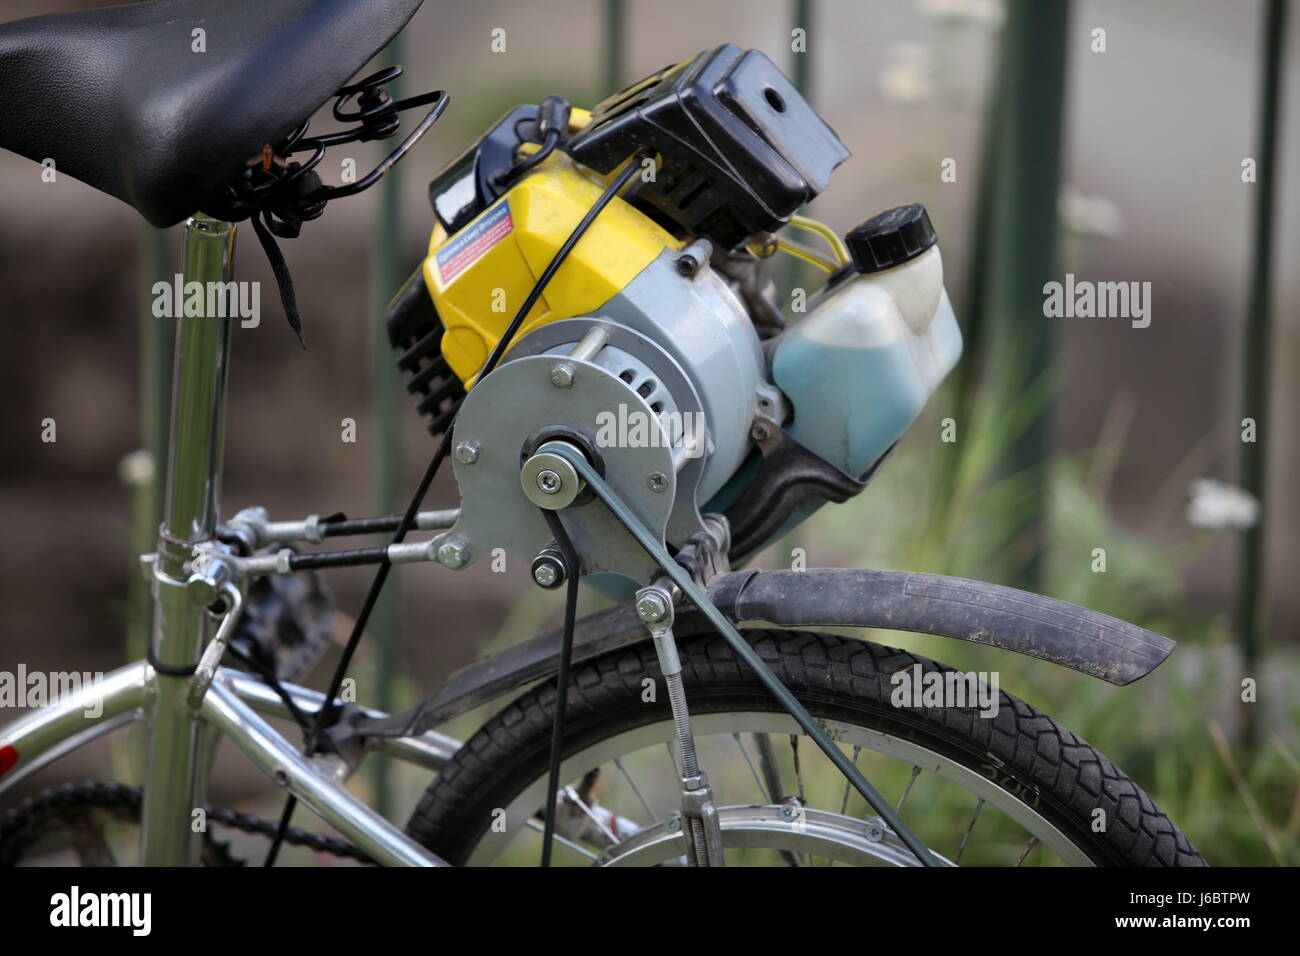 homemade, bicycle with a motor of the lawnmower, fragment Stock Photo